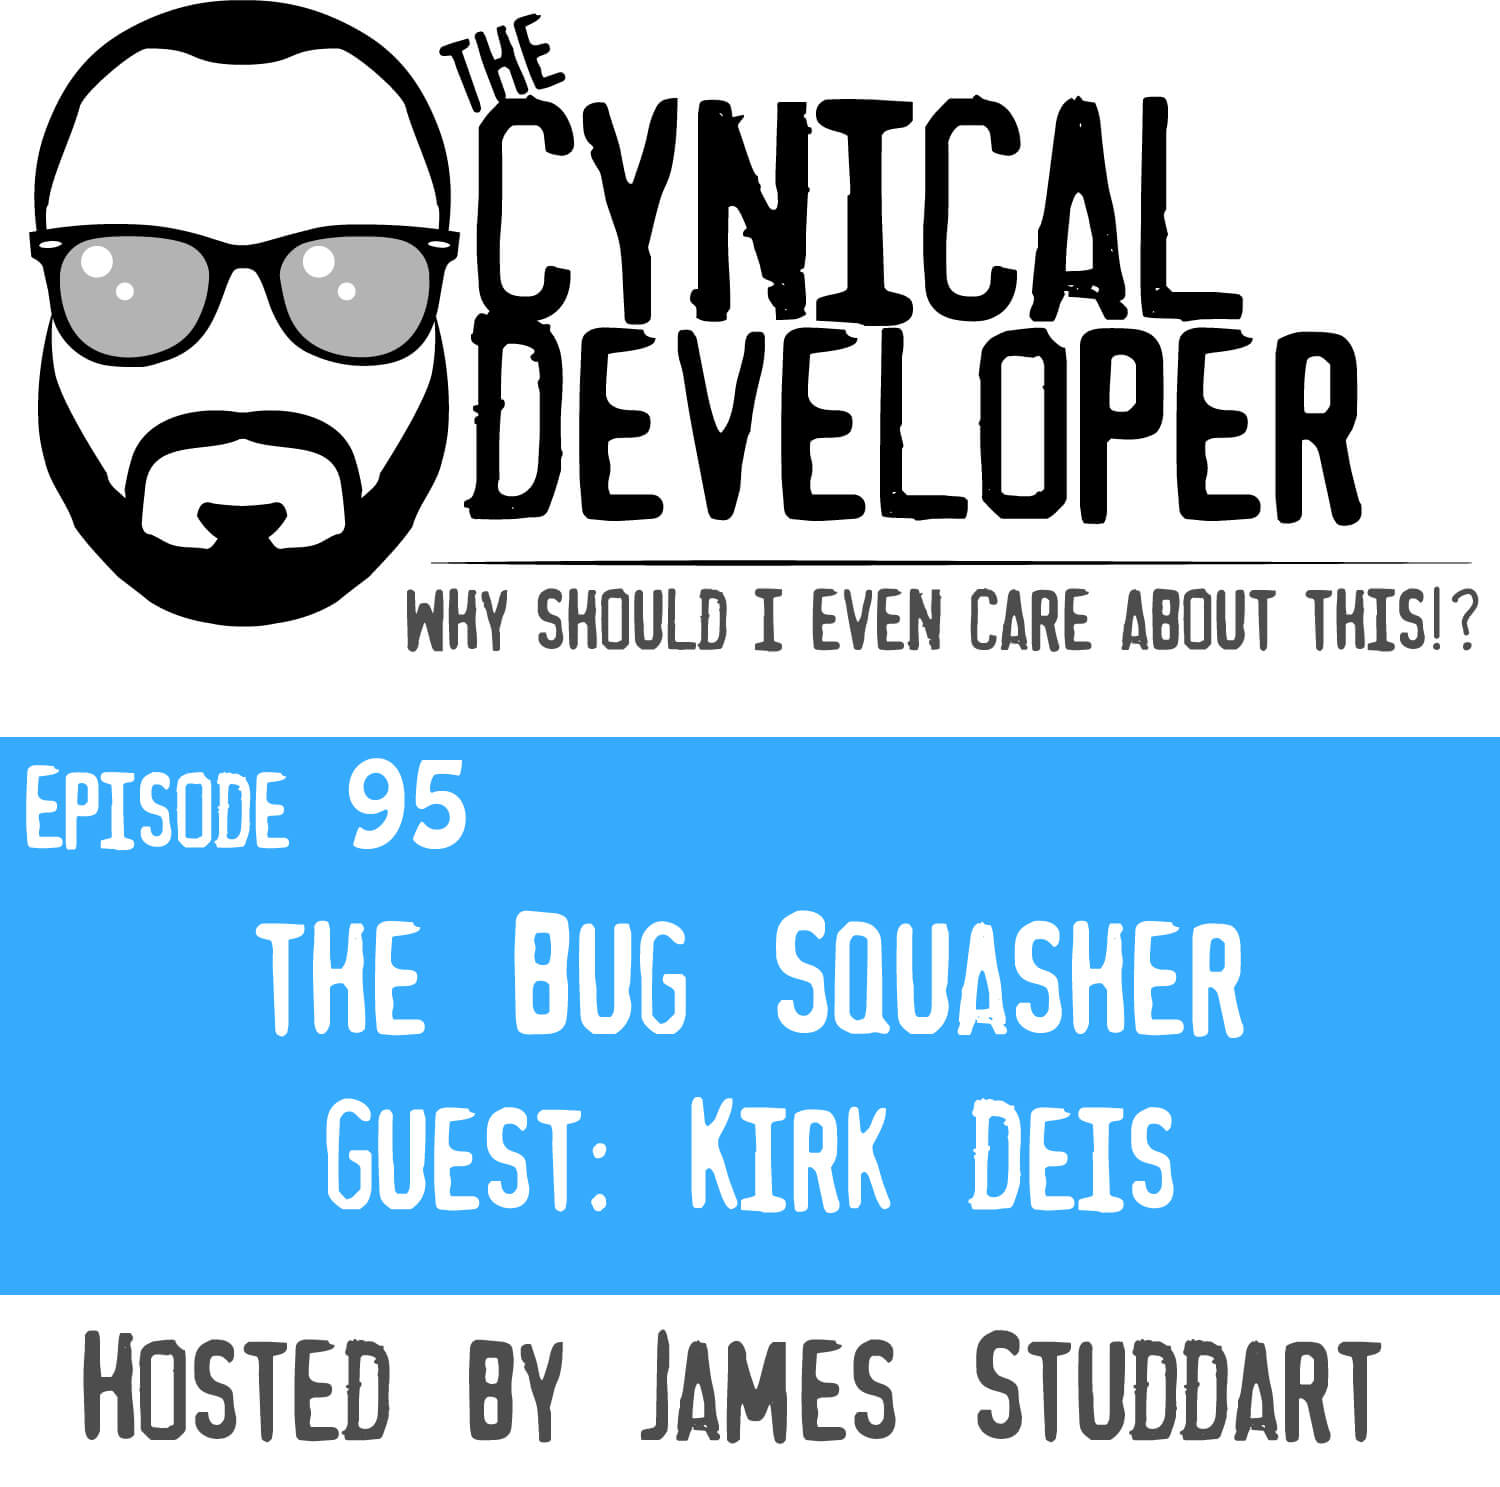 Episode 95 - The Bug Squasher